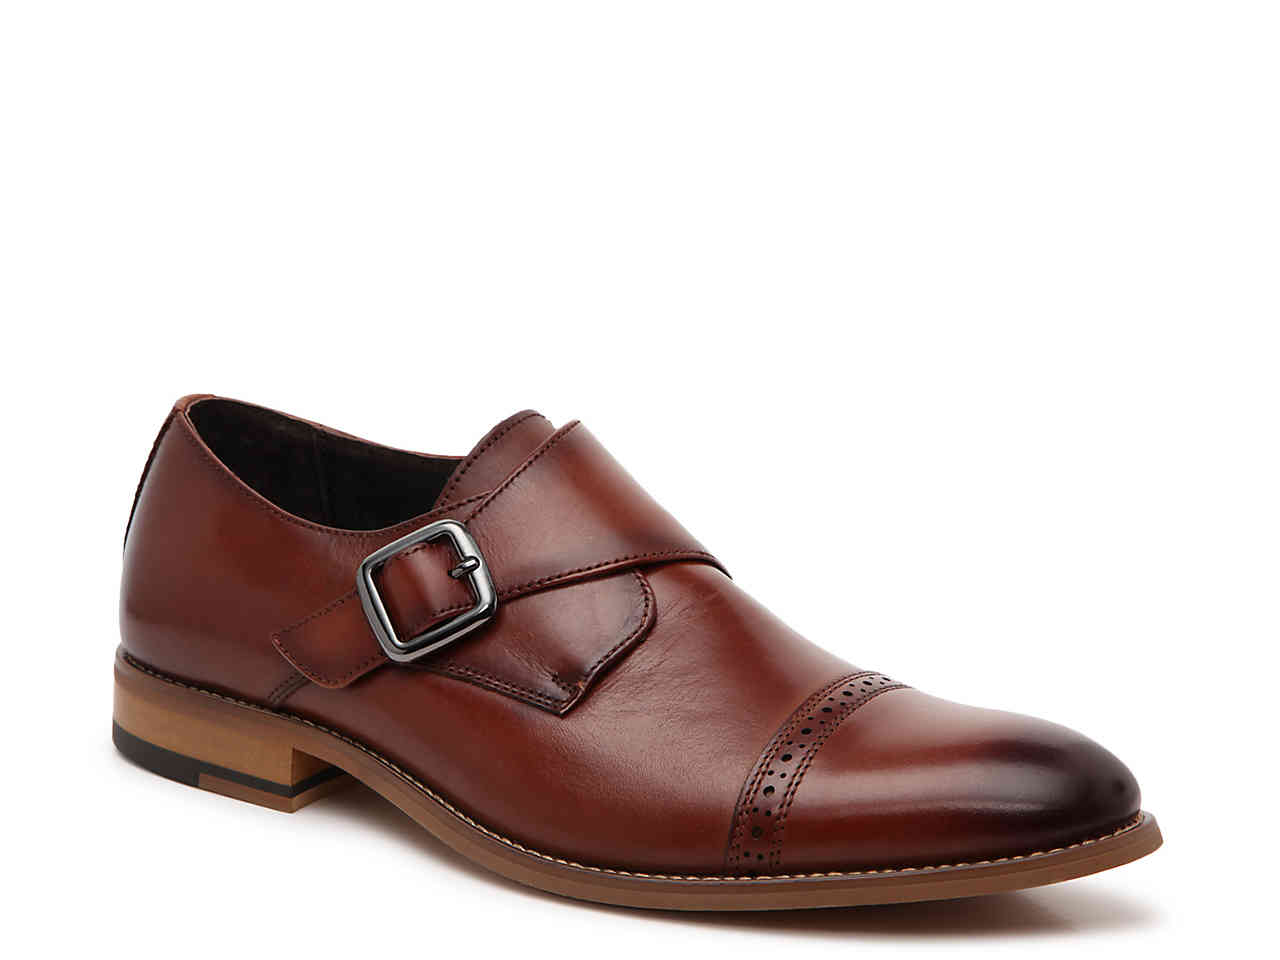 CAP TOE WITH MONK STRAP SMOOTH LEATHER FULLY CUSHIONED MEMORY FOAM ...